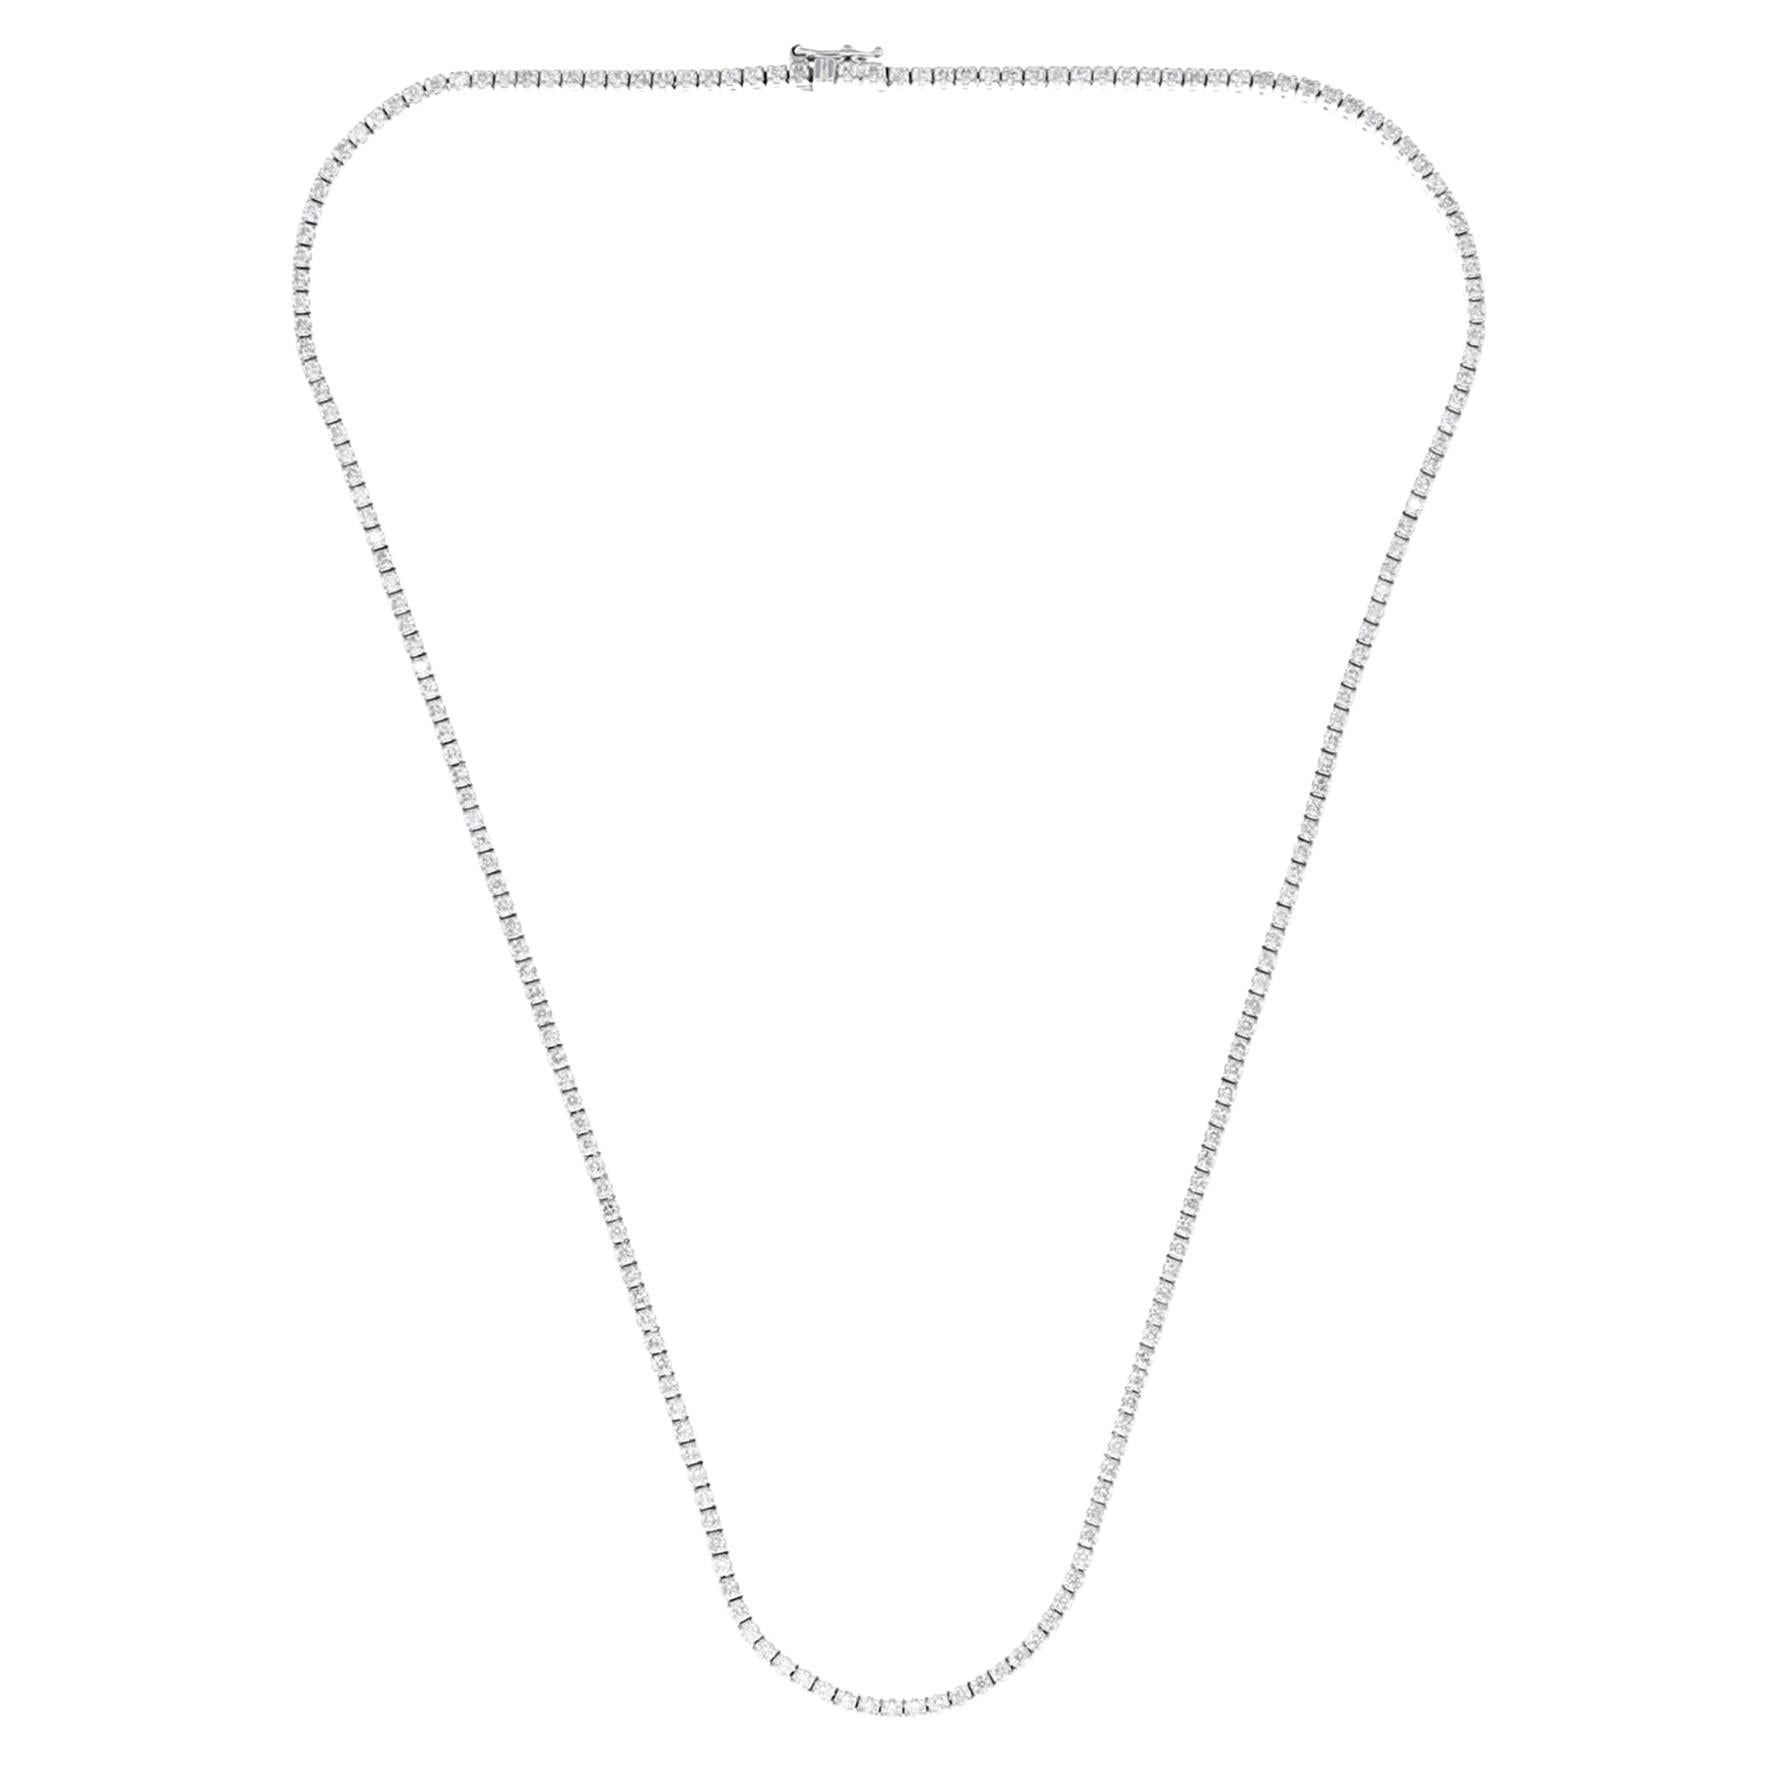 Natural 3.40 Carat SI Clarity HI Color Diamond Tennis Necklace 10k White Gold For Sale